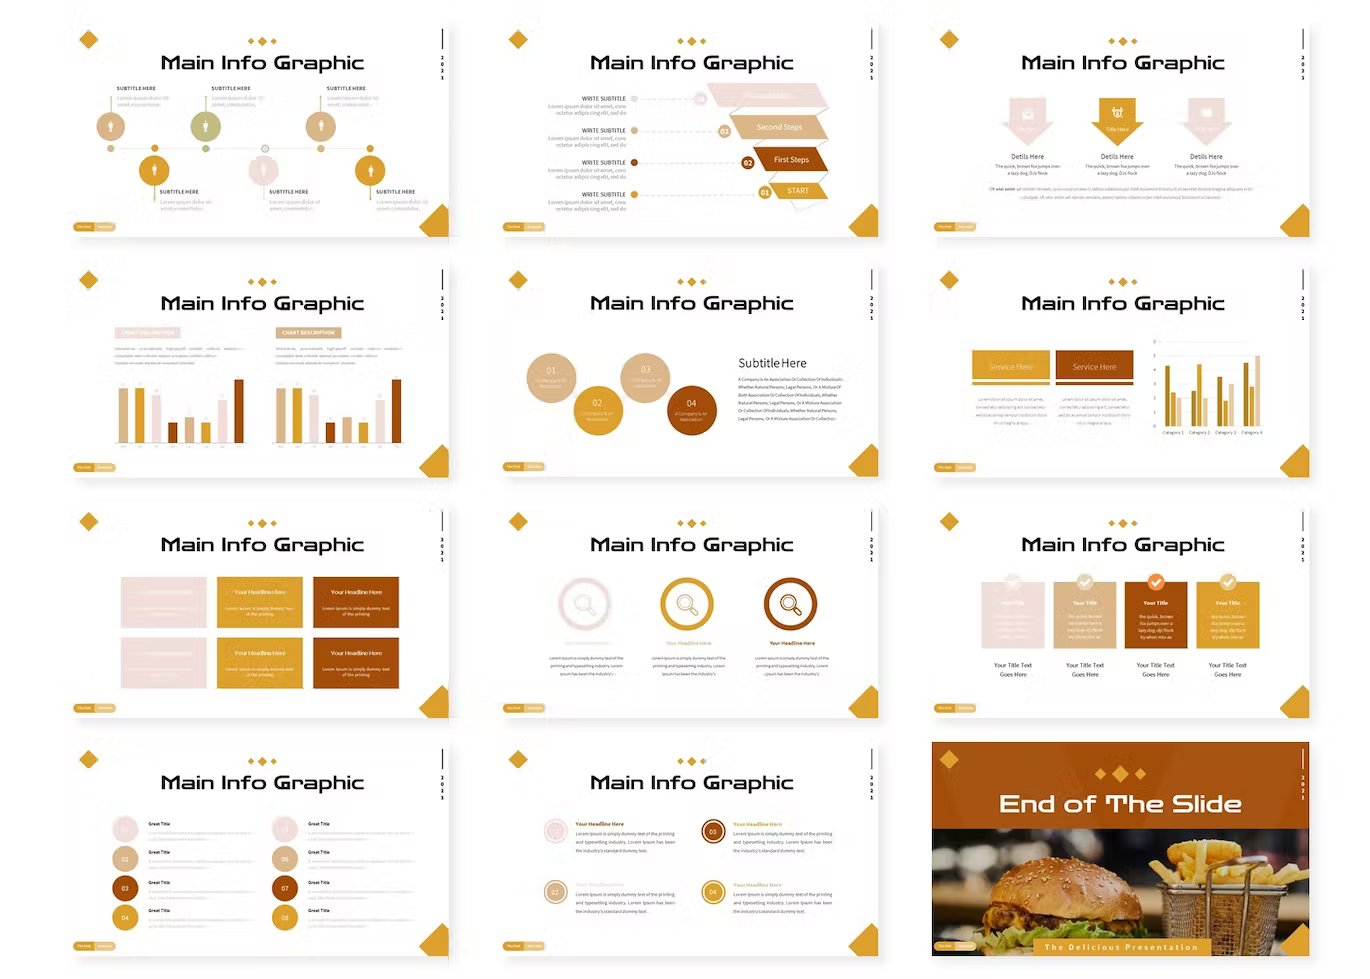 A set of 12 different burger products powerpoint templates in brown, yellow, white and black on a white background.